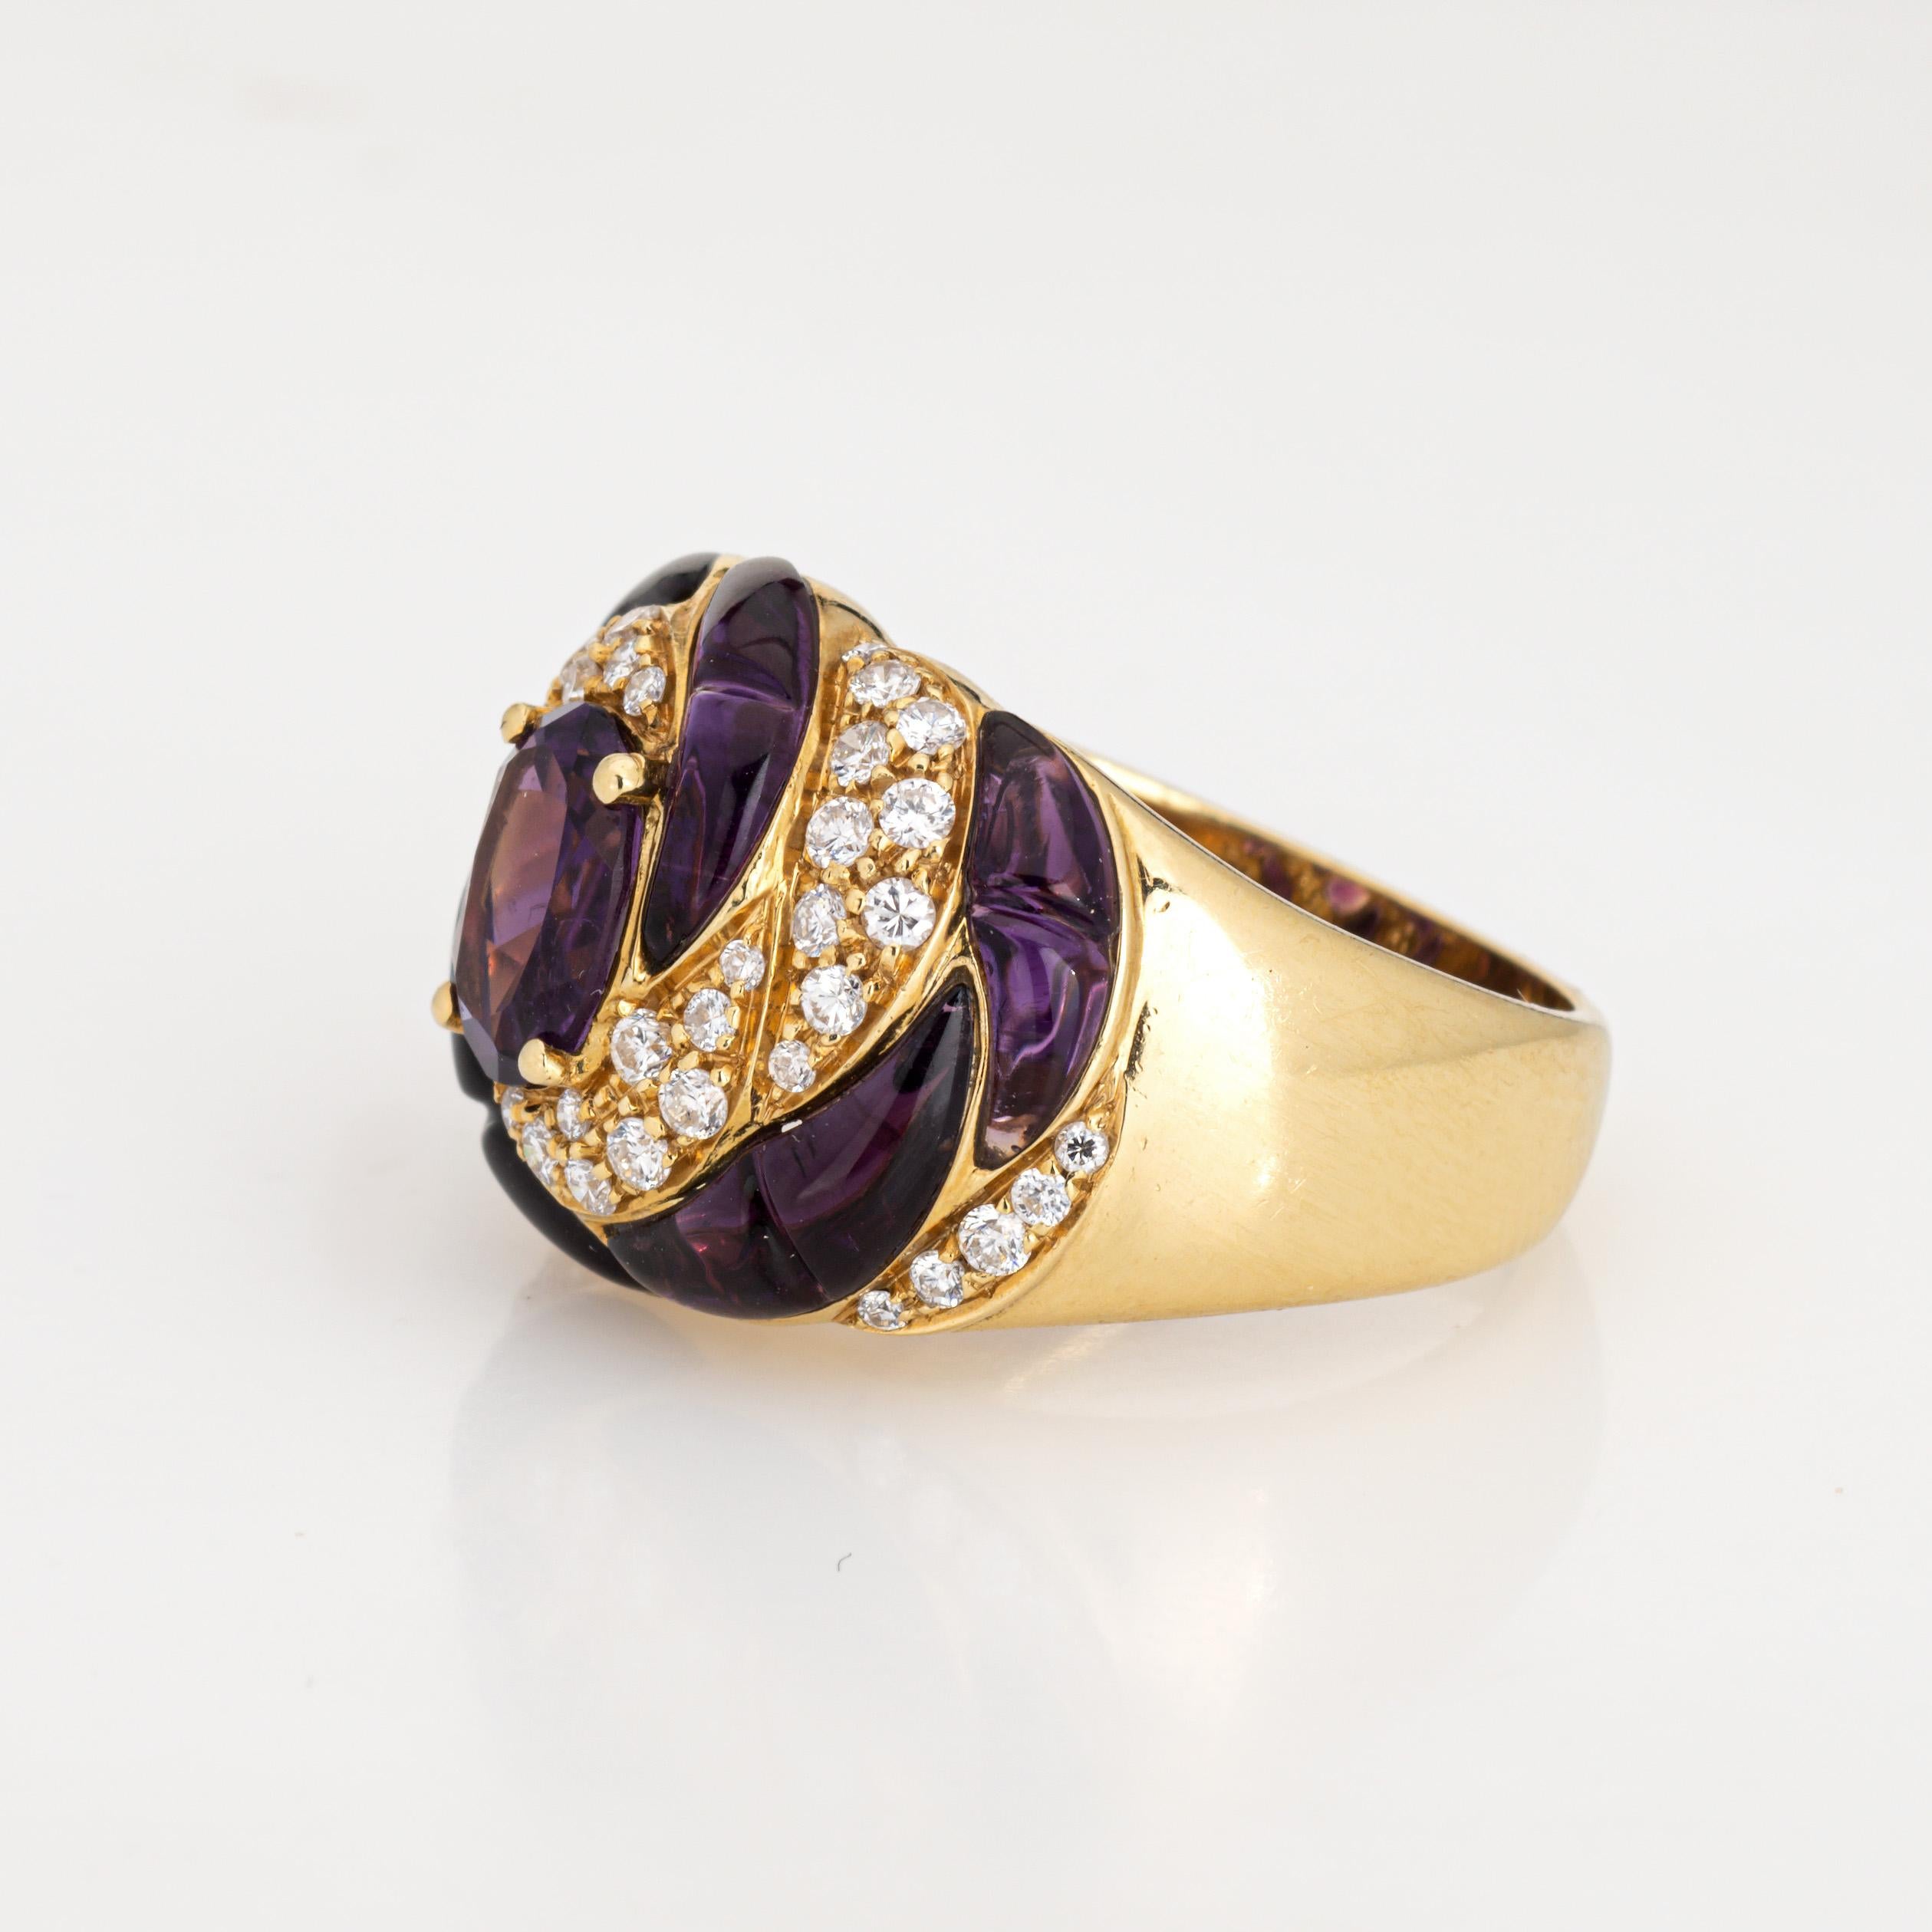 Oval Cut Amethyst Diamond Ring Vintage 18k Yellow Gold Calibre Cut Swirl Band Sz 6 For Sale